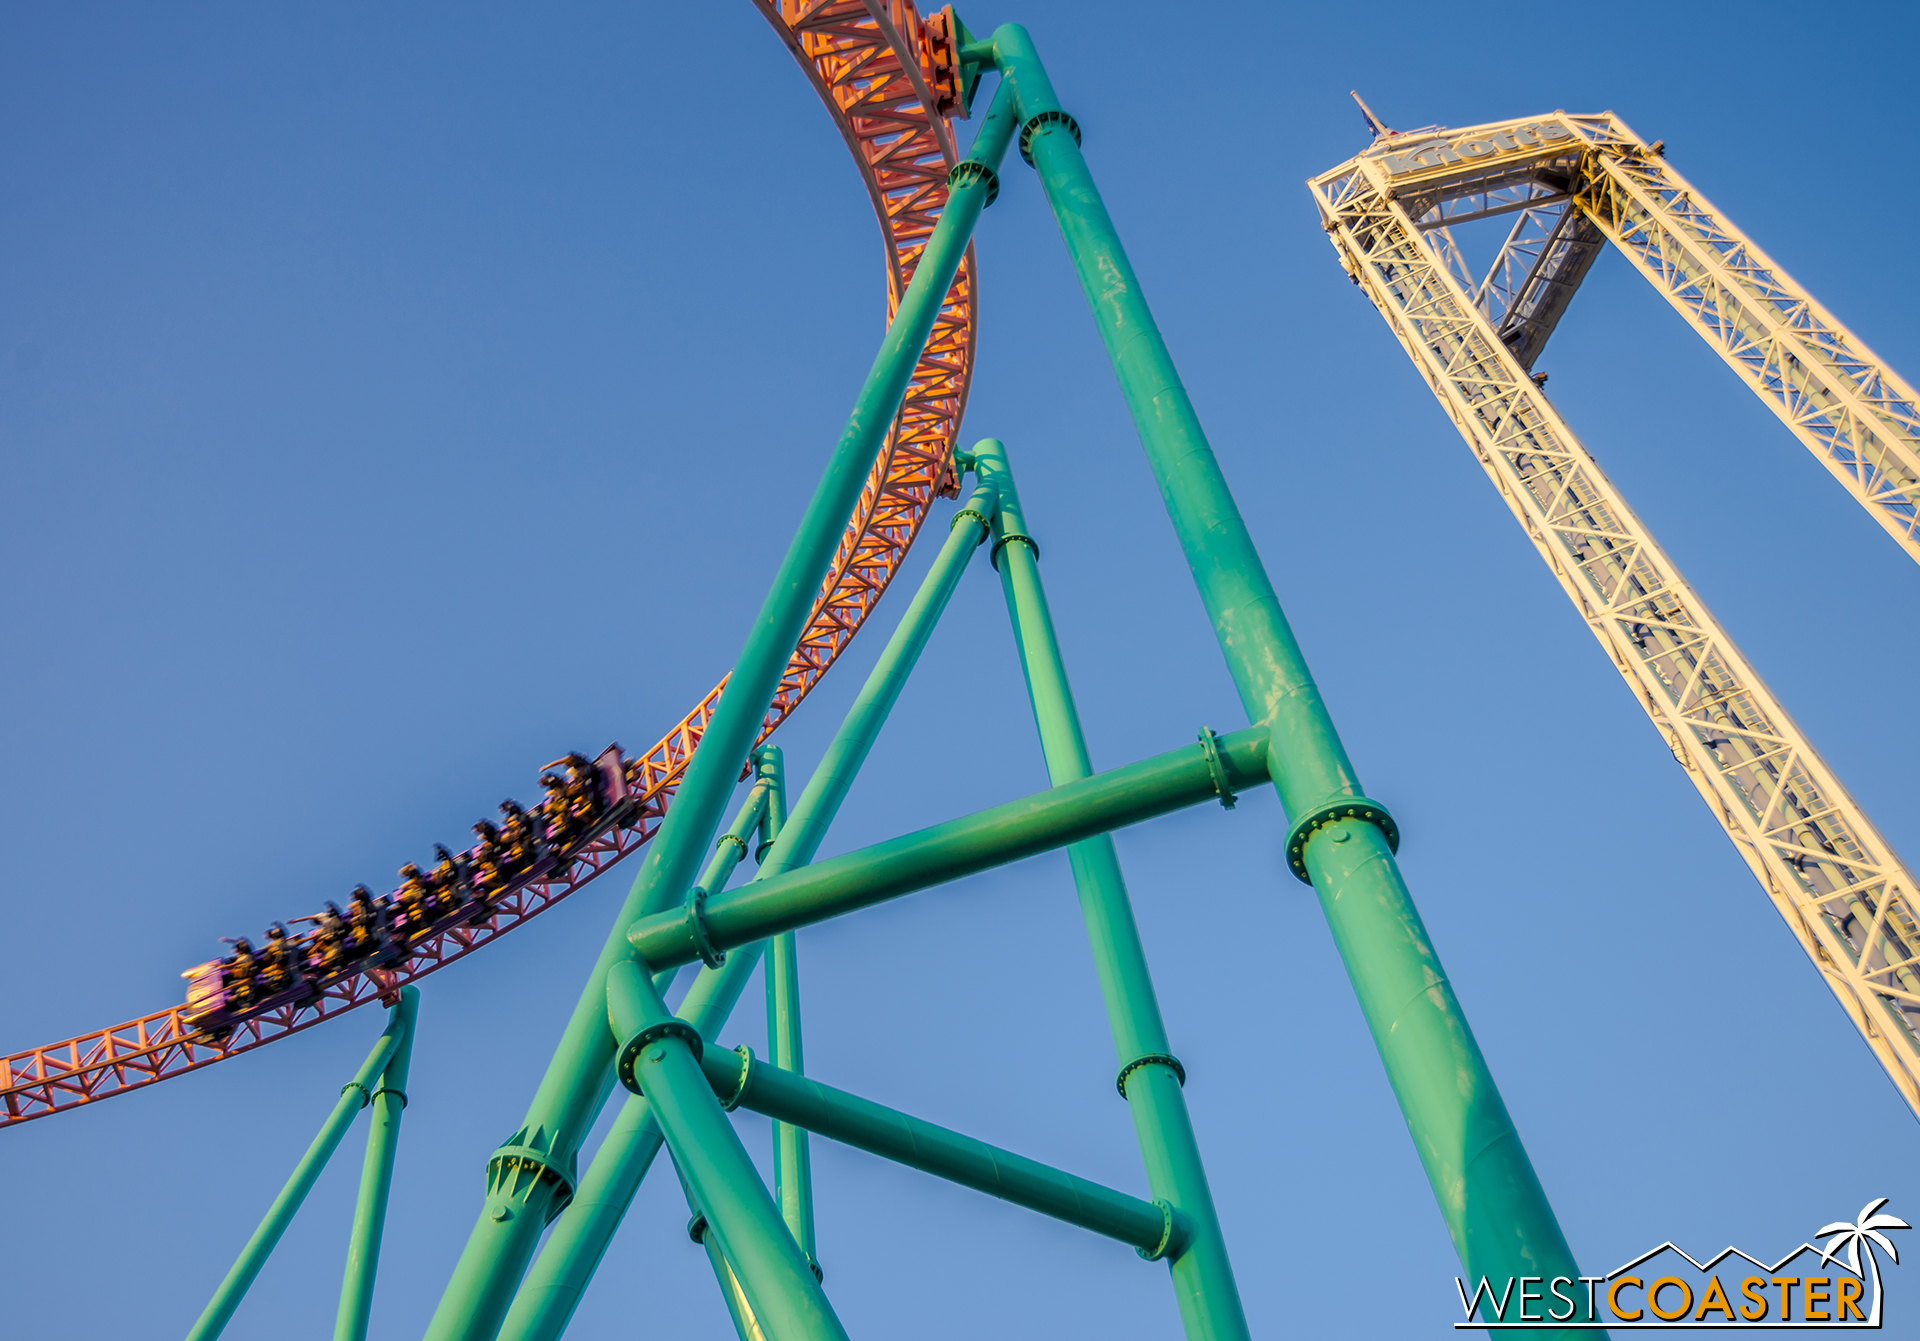  Xcelerator, with Supreme Scream in the background. 